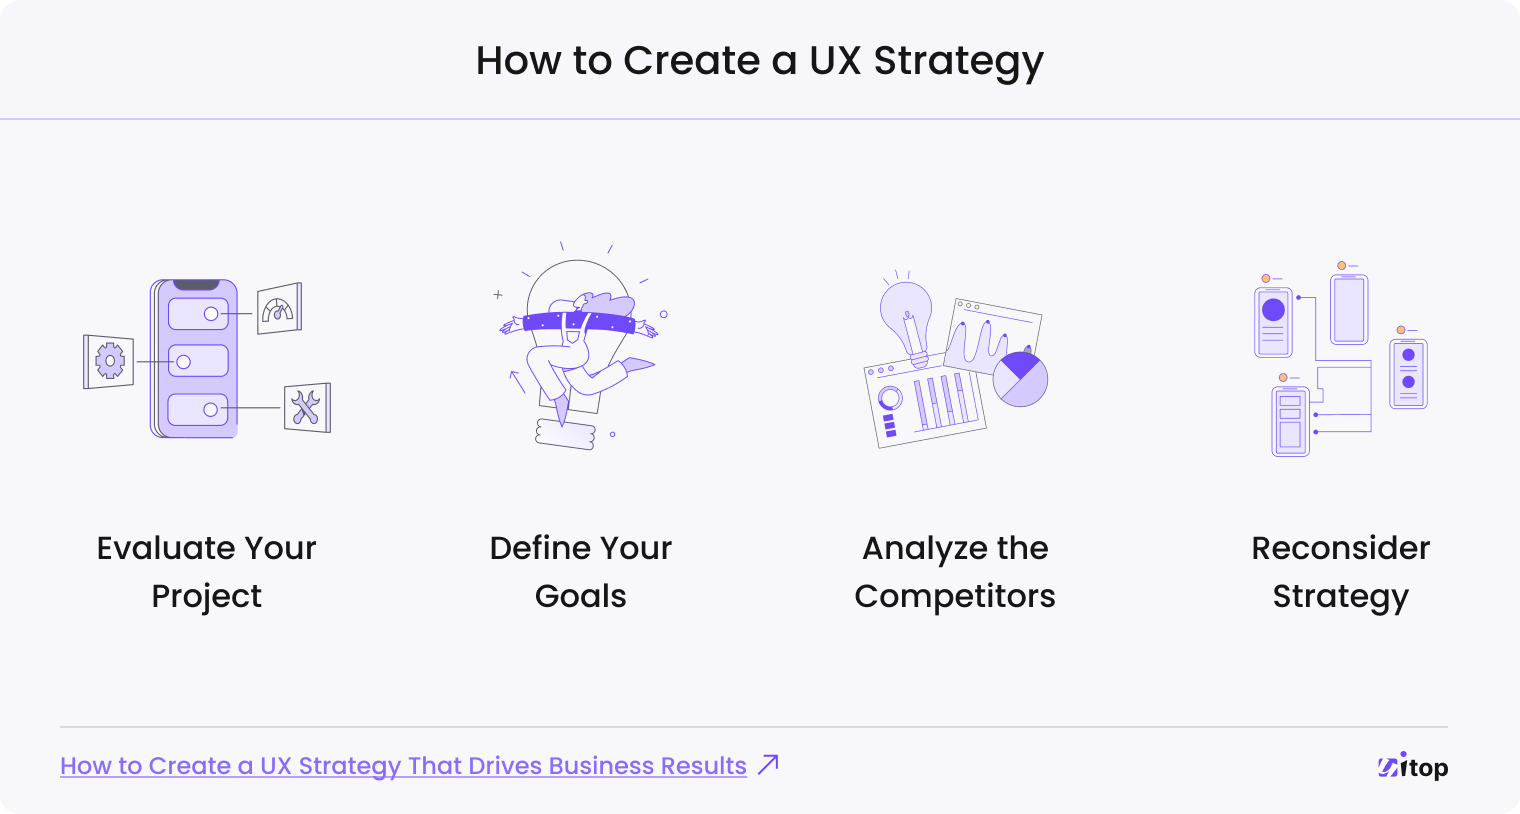 Creating a UX strategy